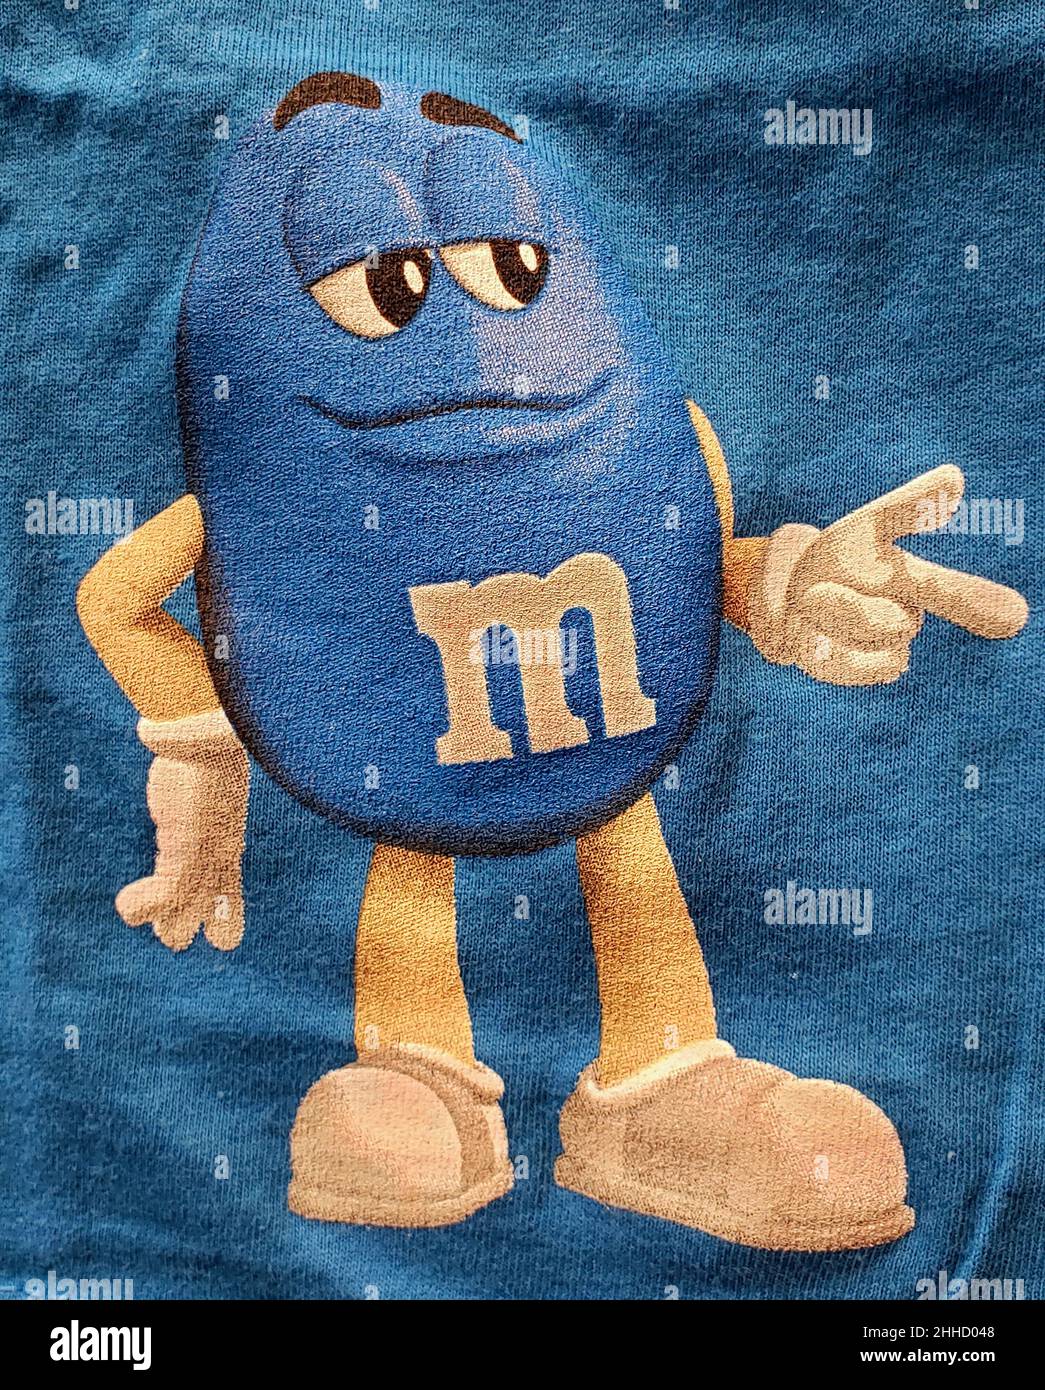 M&M's Are Getting A New Look To Become More 'Inclusive